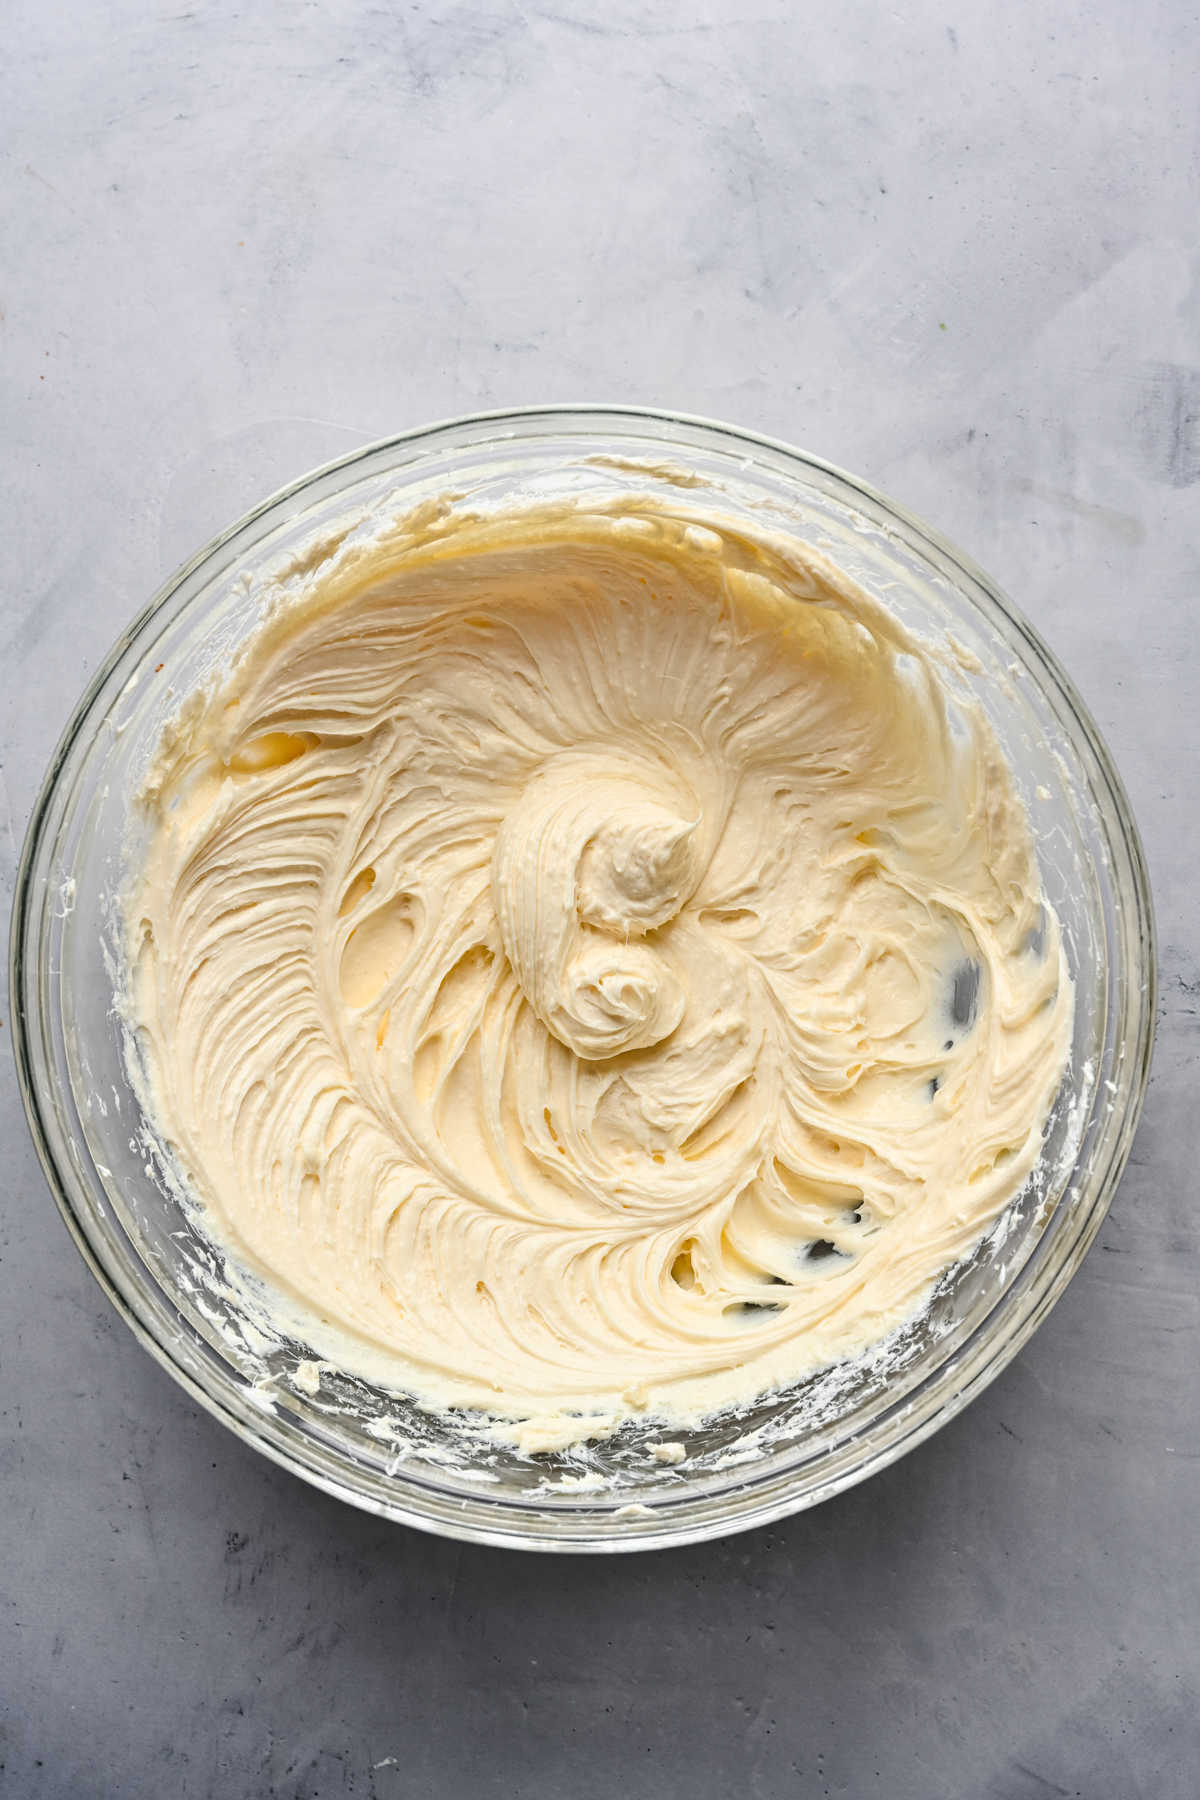 Cream cheese beaten in a glass mixing bowl. 